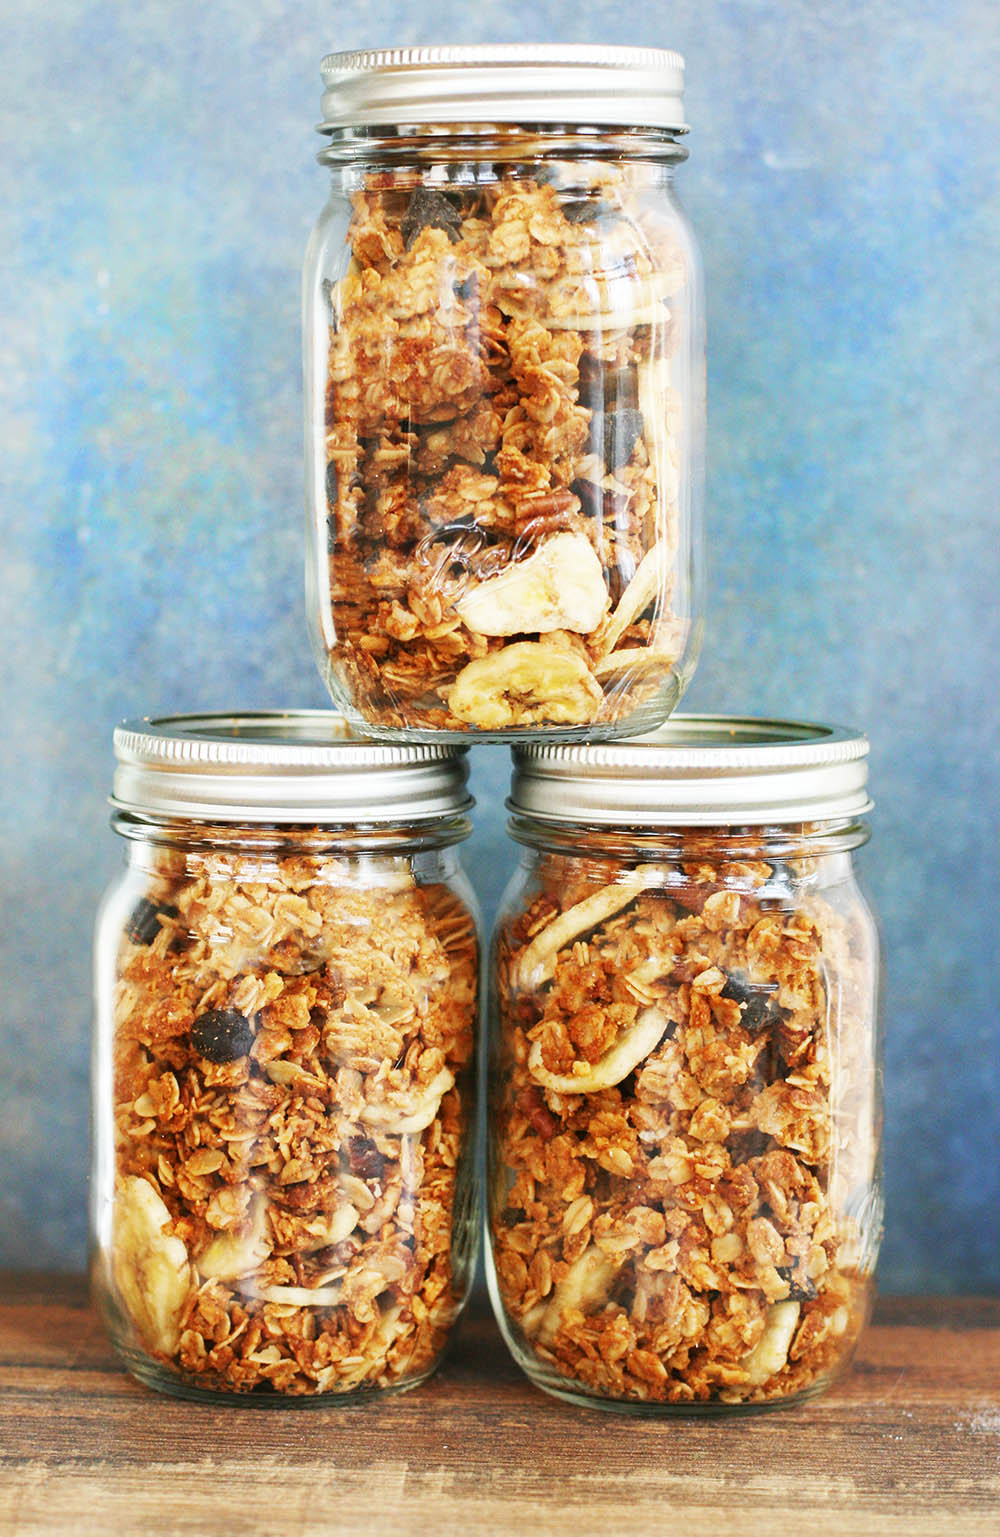 Homemade granola in a jar makes a great, last-minute cheap gift!